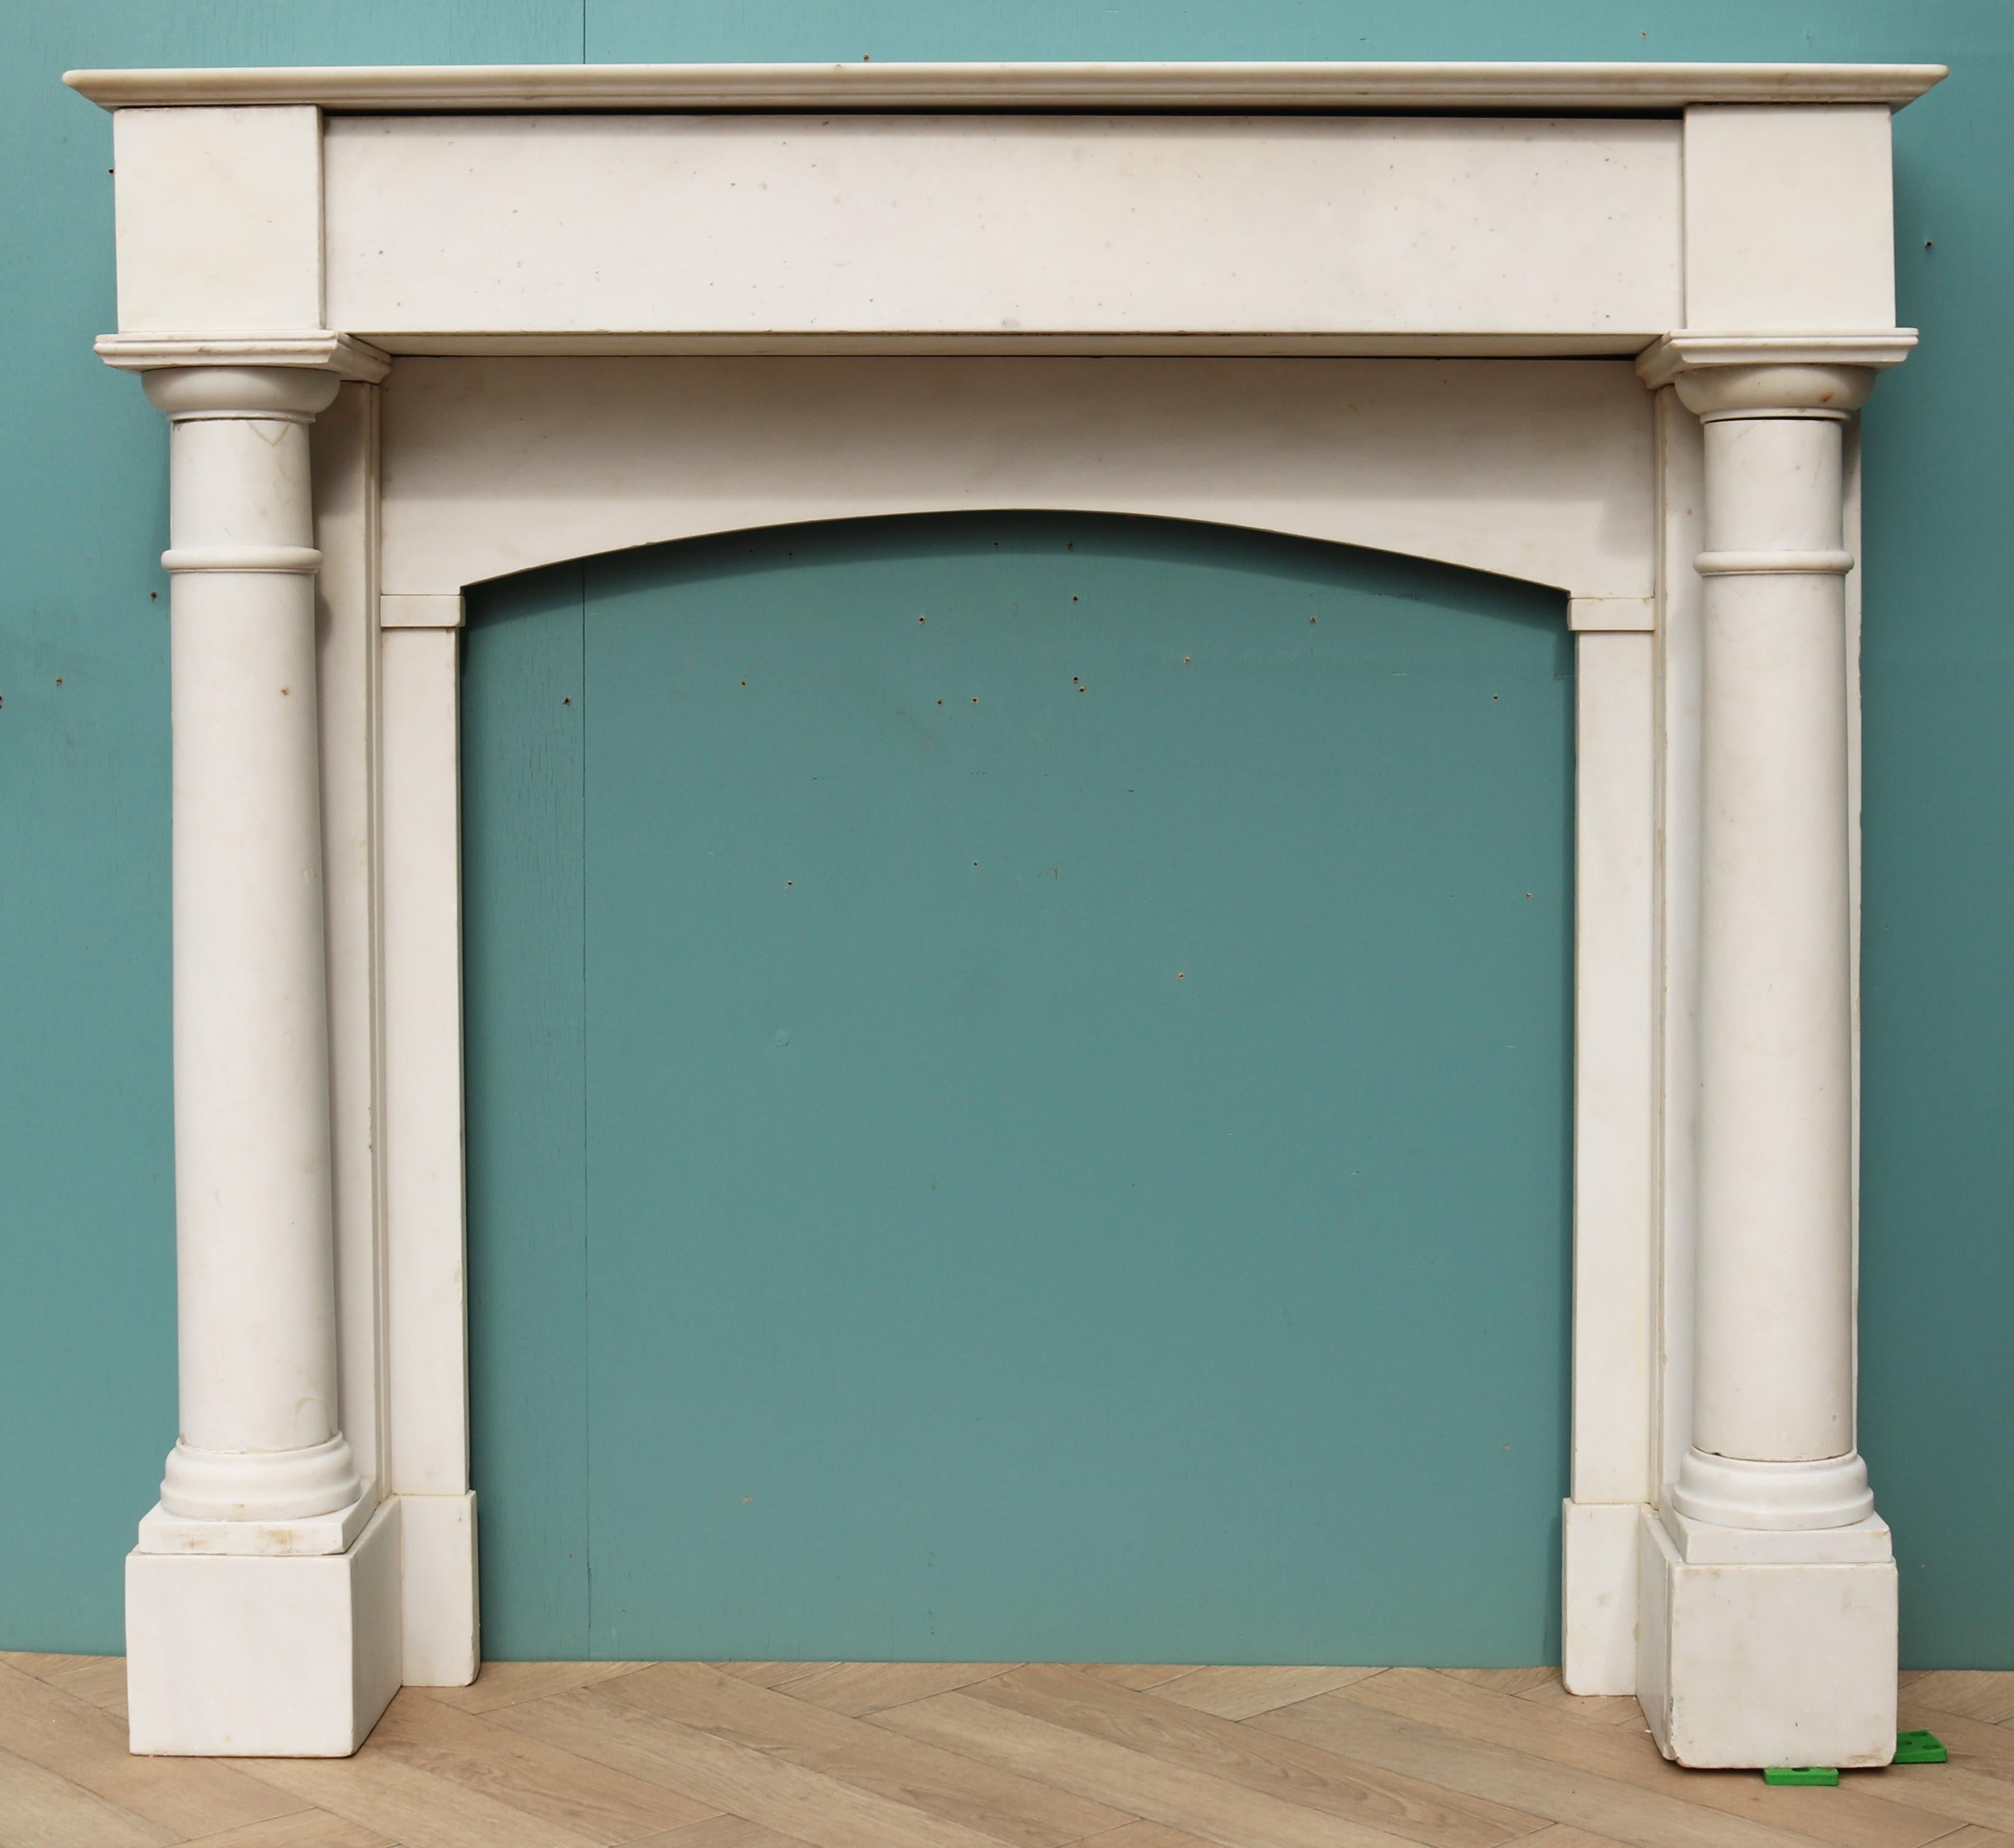 A compact antique white statuary marble fire mantel with full column supports dating from the mid 19th century. Crafted from fine quality statuary marble, this antique fireplace showcases influences of classical Louis styling with impressive